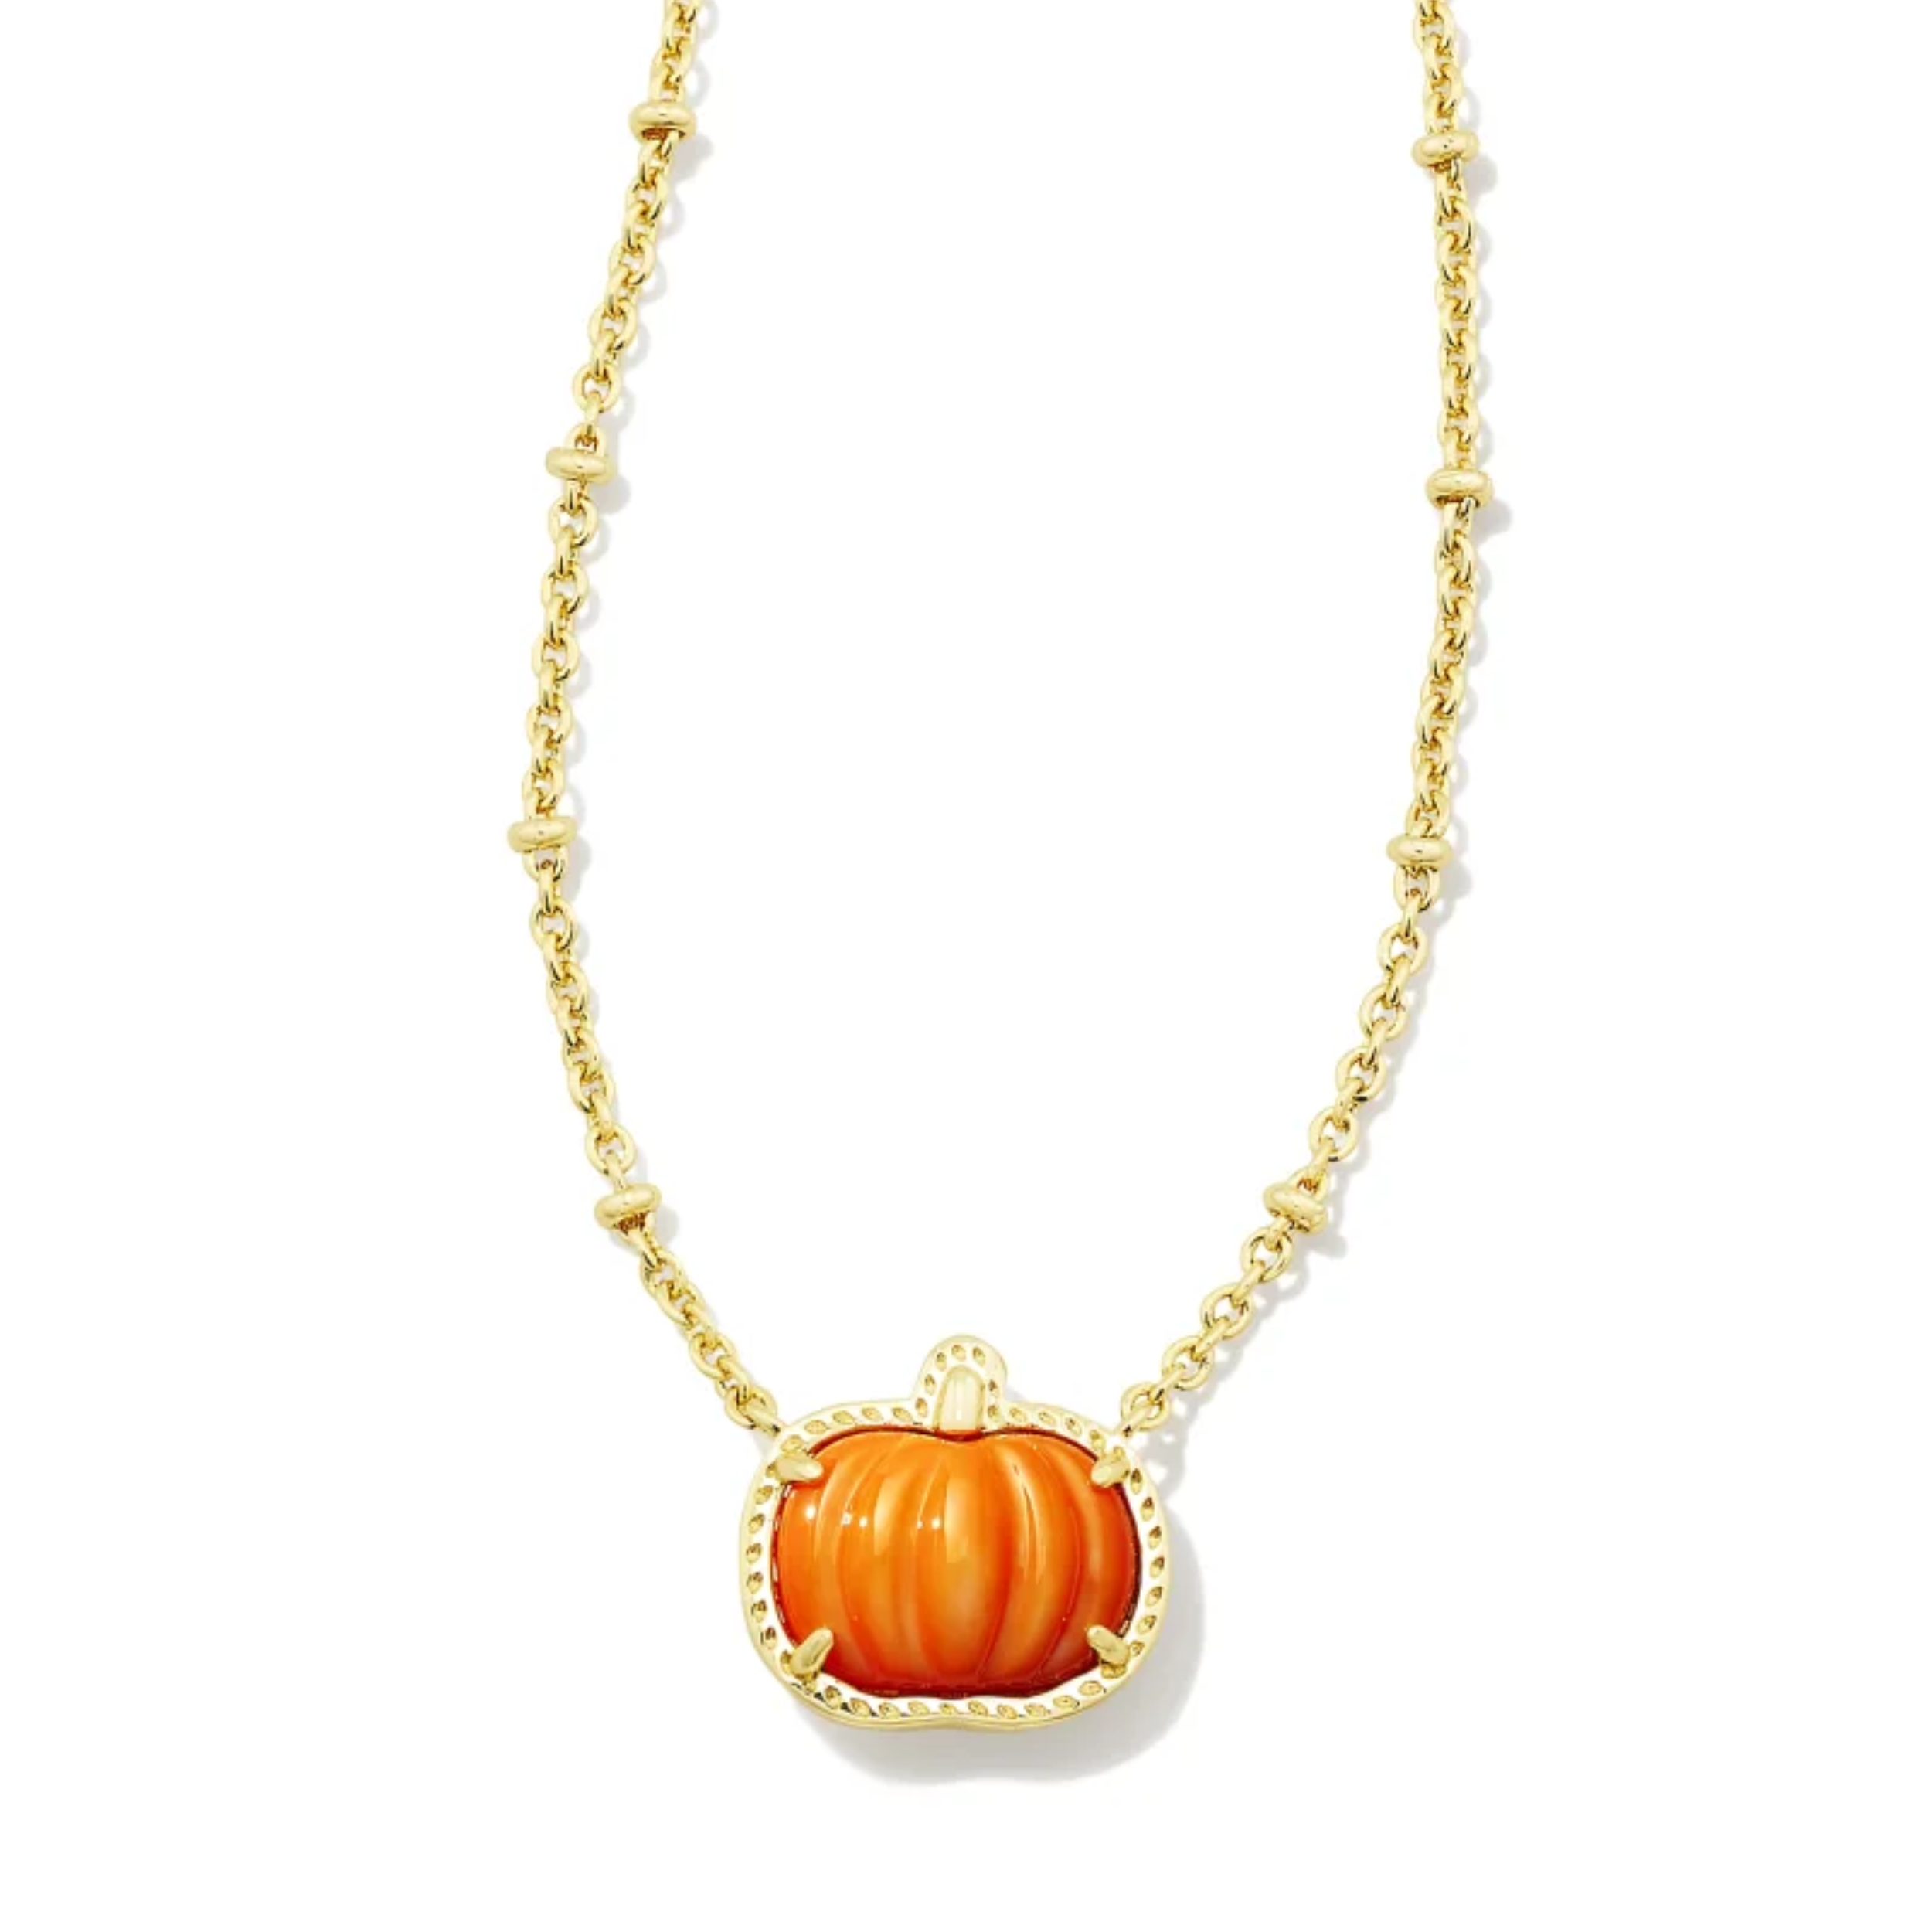 This Pumpkin Gold Short Pendant Necklace iin Orange Mother-Of-Pearl by Kendra Scott is pictured on a white background.